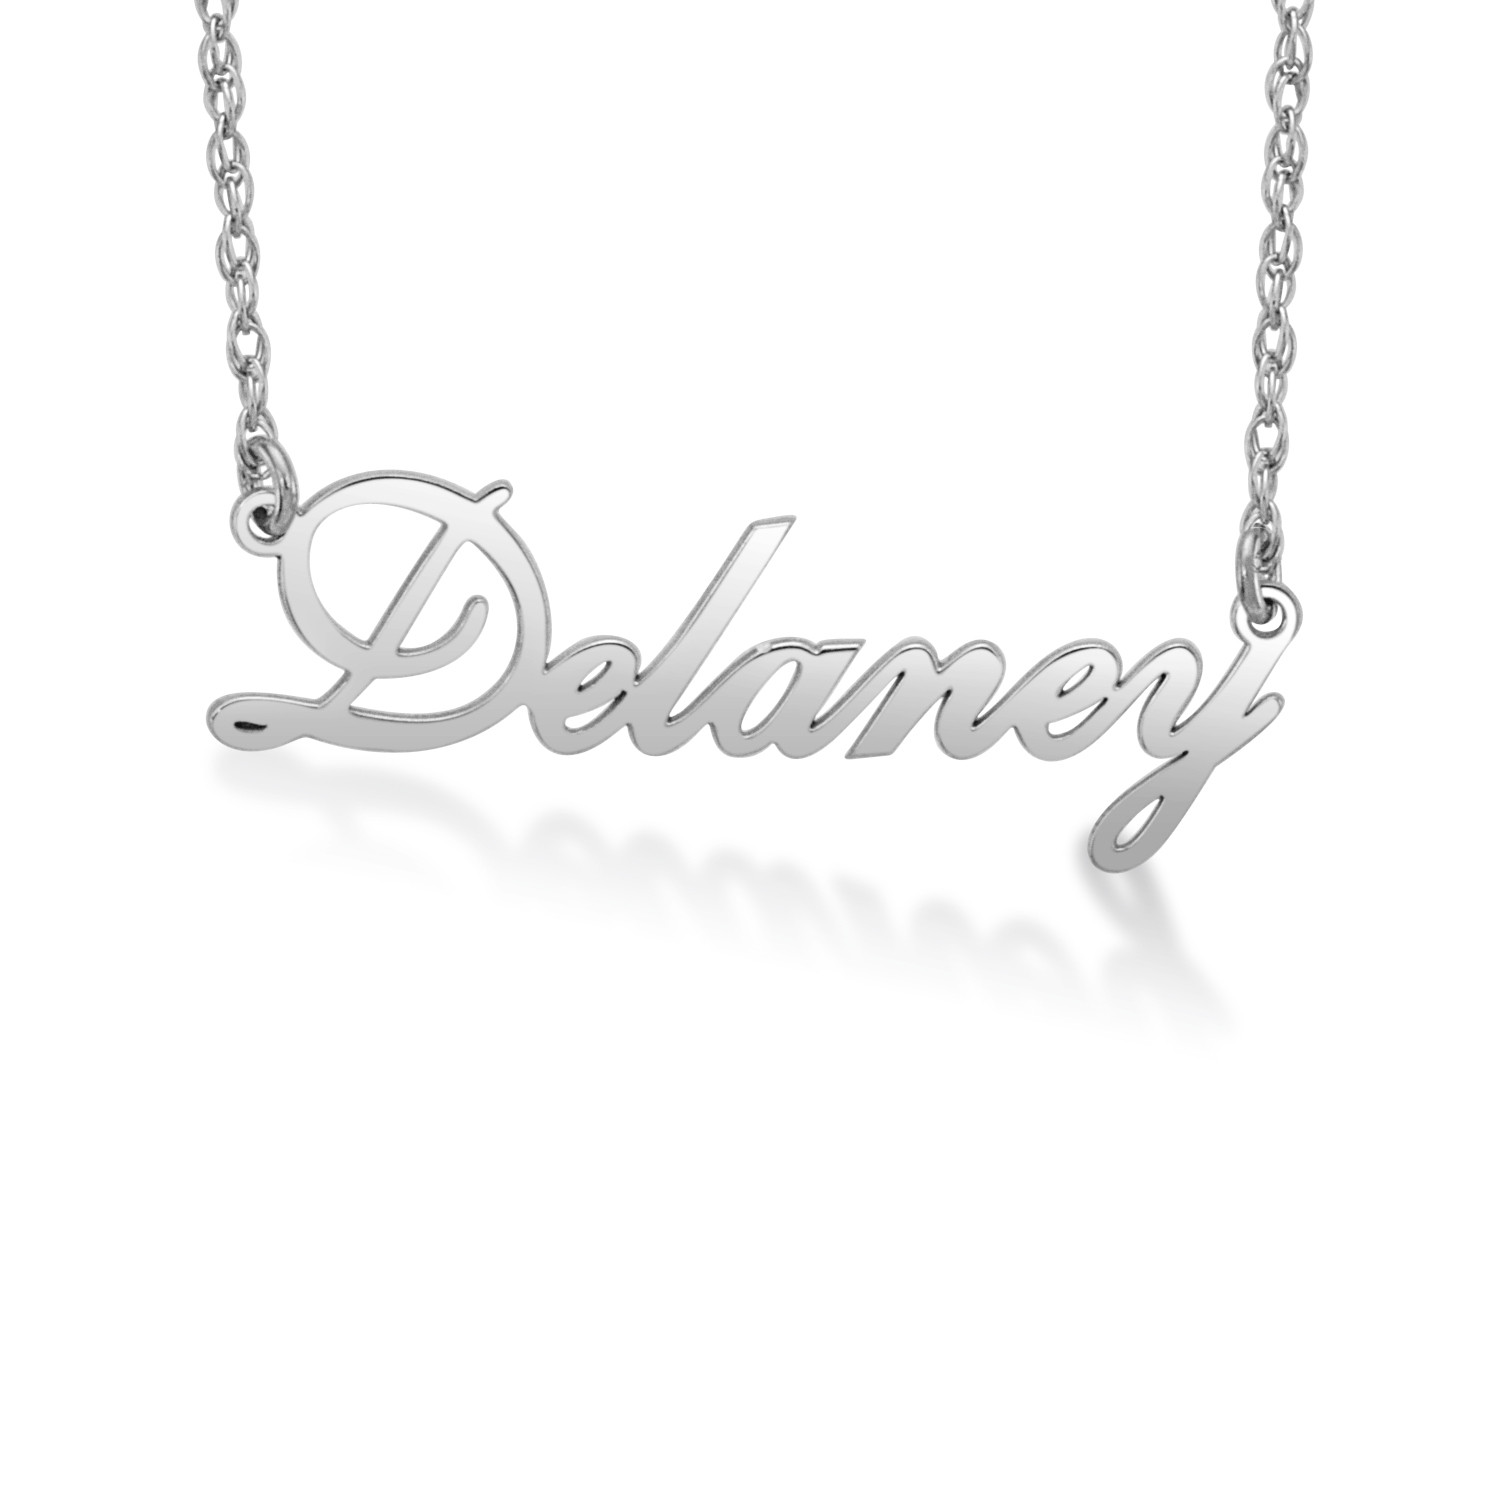 Personalized Name Custom Glass Jewelry Making Charms Script Silver / 1 Charm